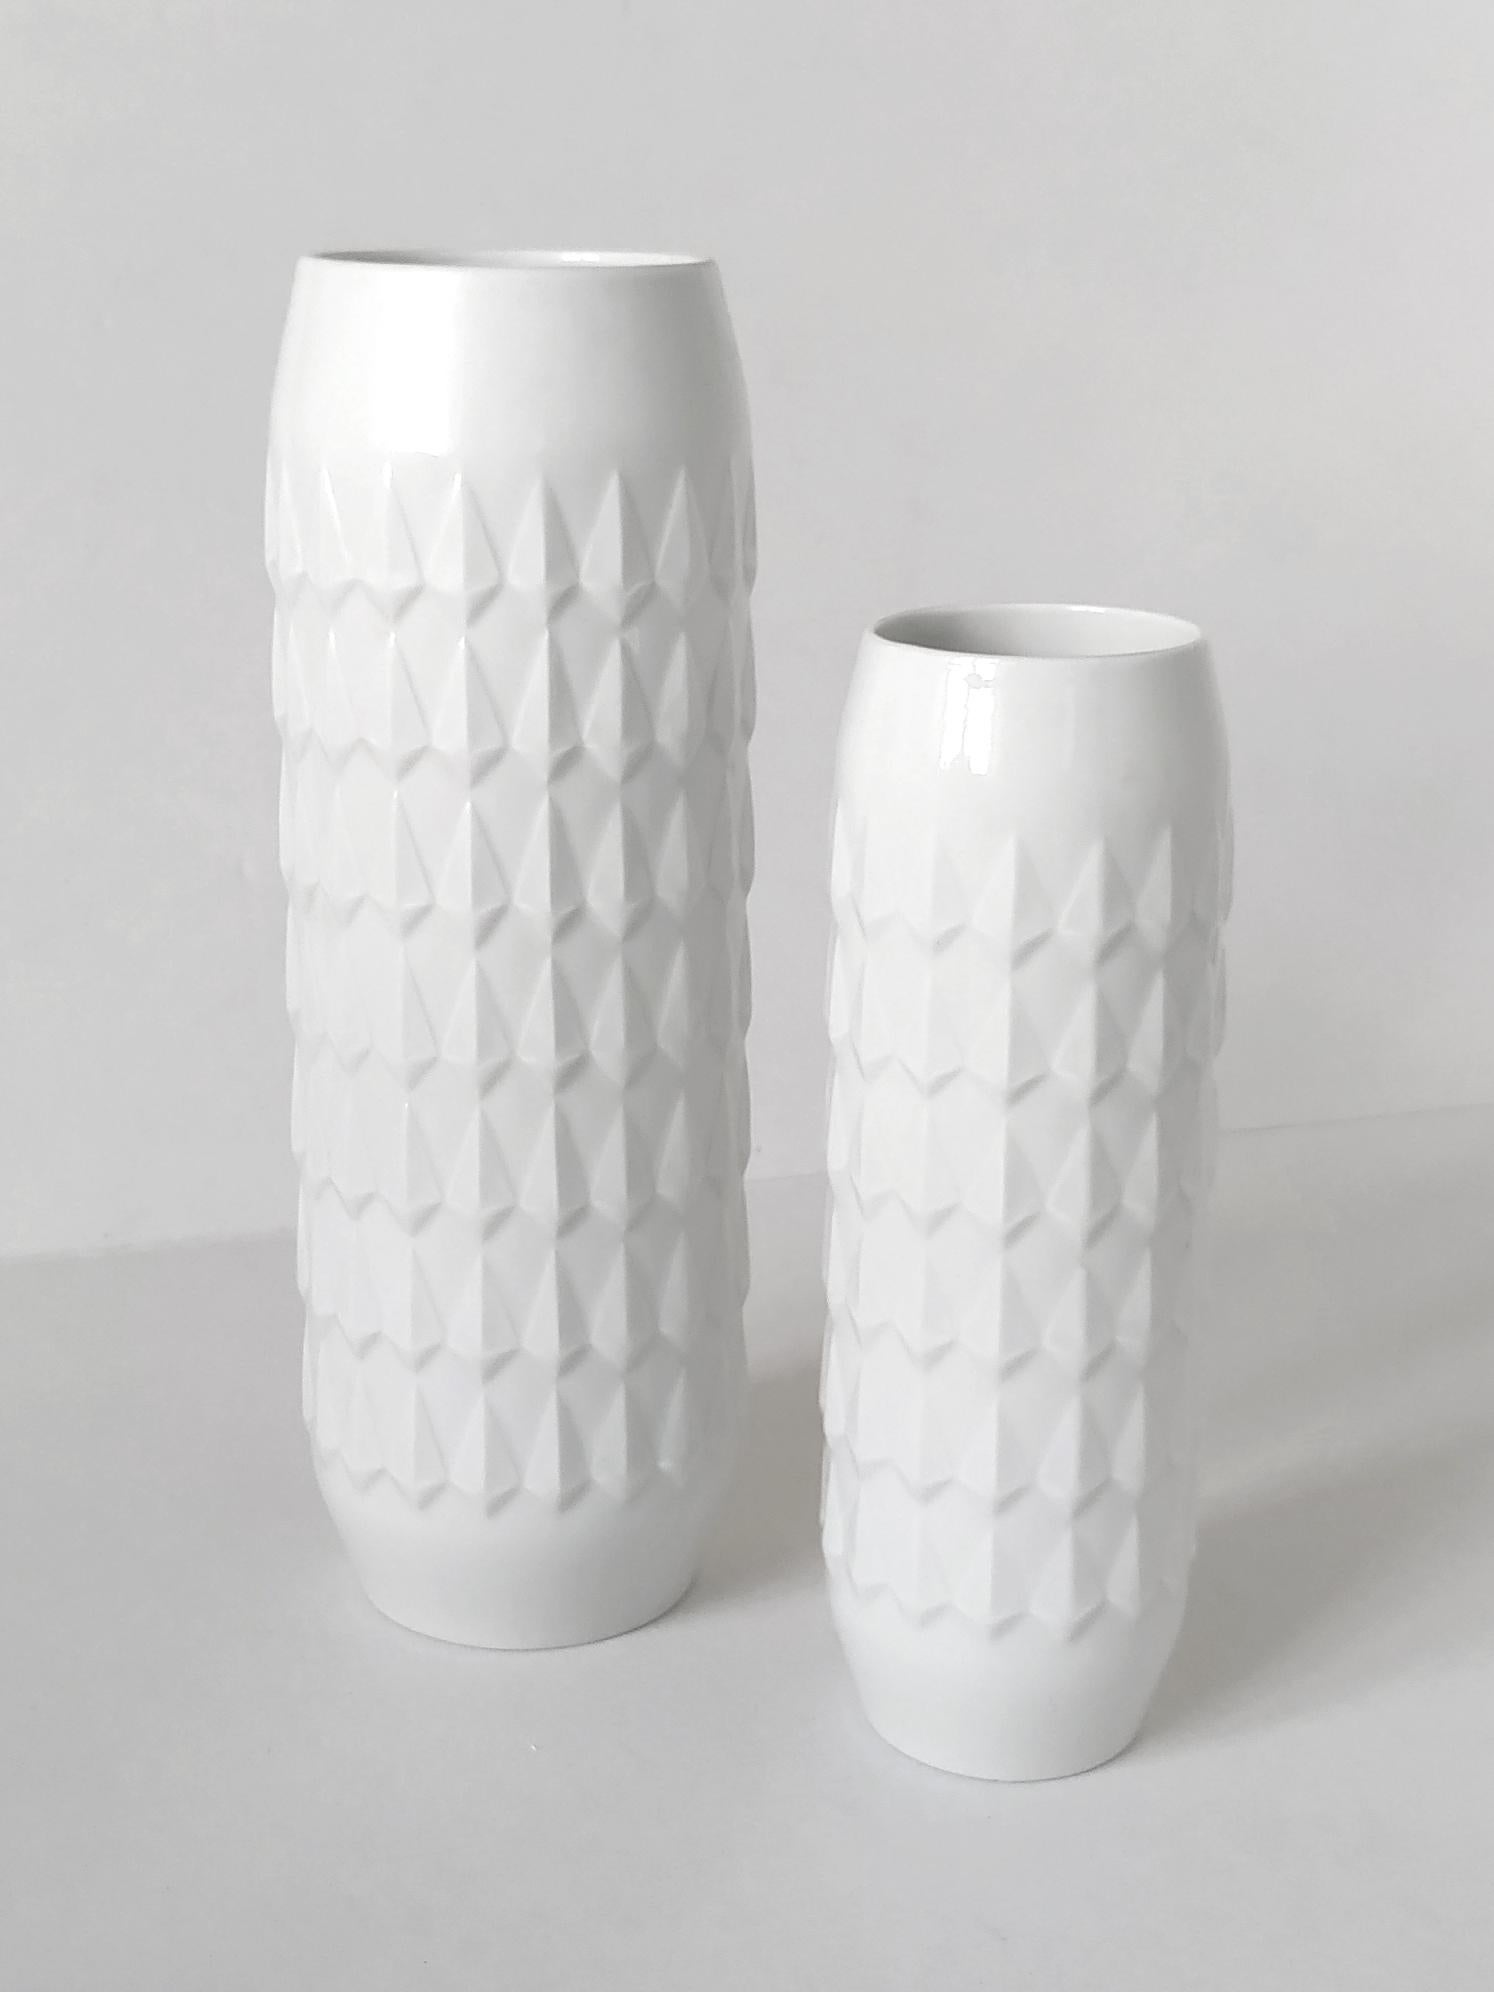 Beautiful sculptural pair of white porcelain vases by Hutschenreuther.
Germany, 1960s.
Measures: 
1. Height 10.8 In
2. Height 8.5 In.
  